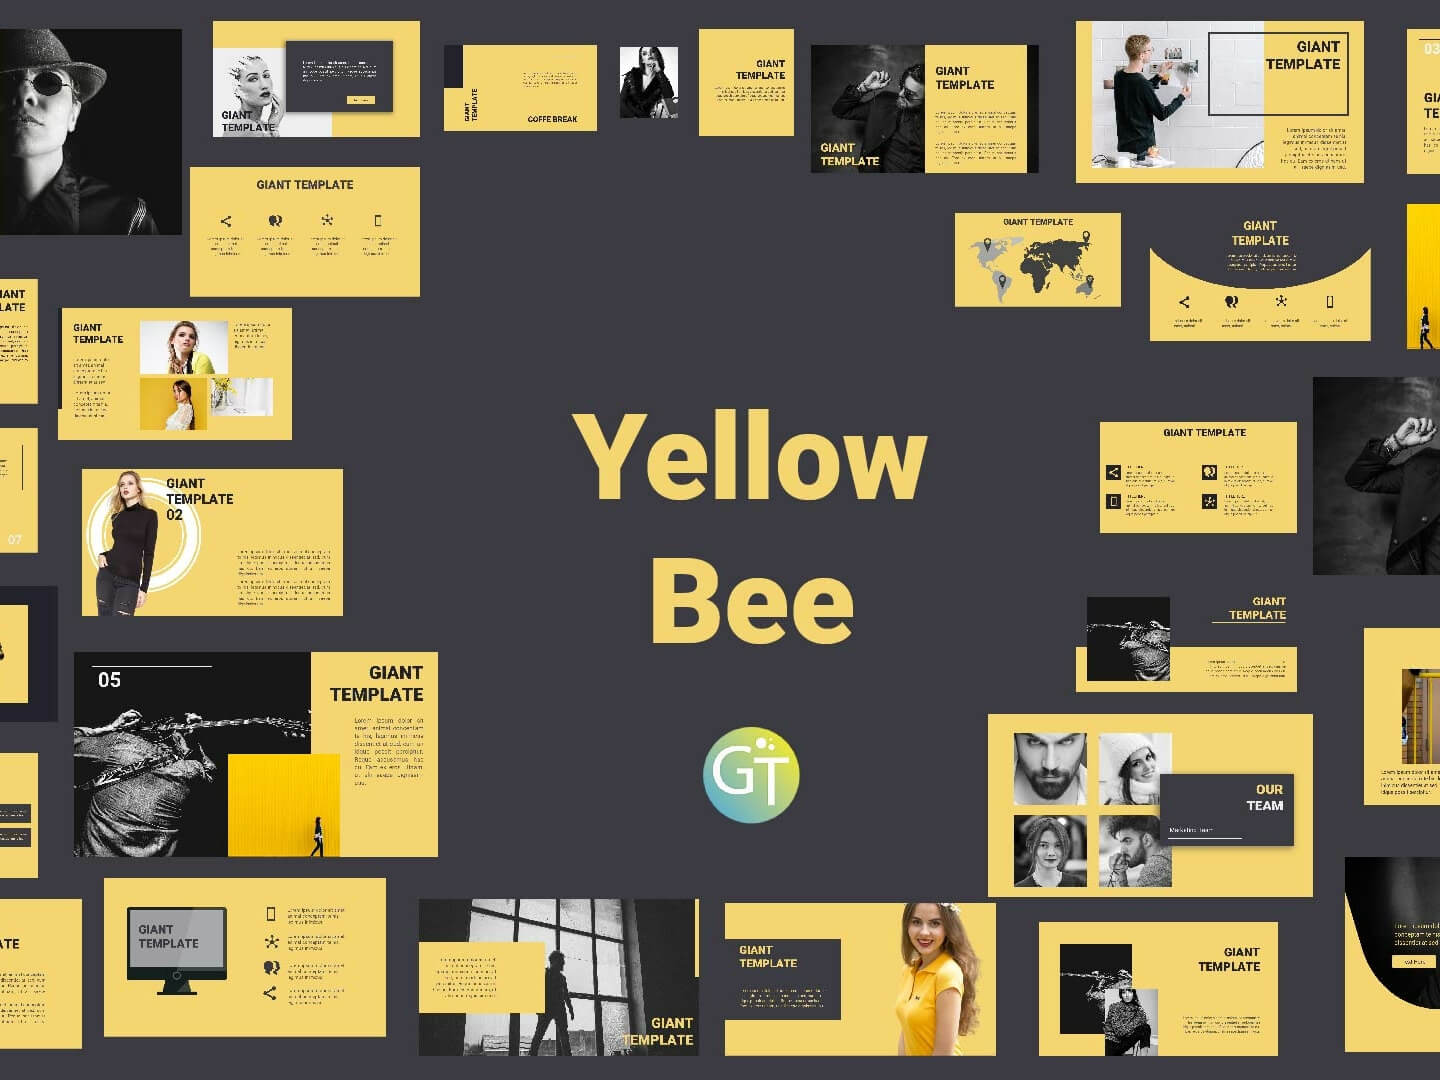 Yellowbee Free Powerpoint Template Free Downloadgiant Within Powerpoint Animation Templates Free Download